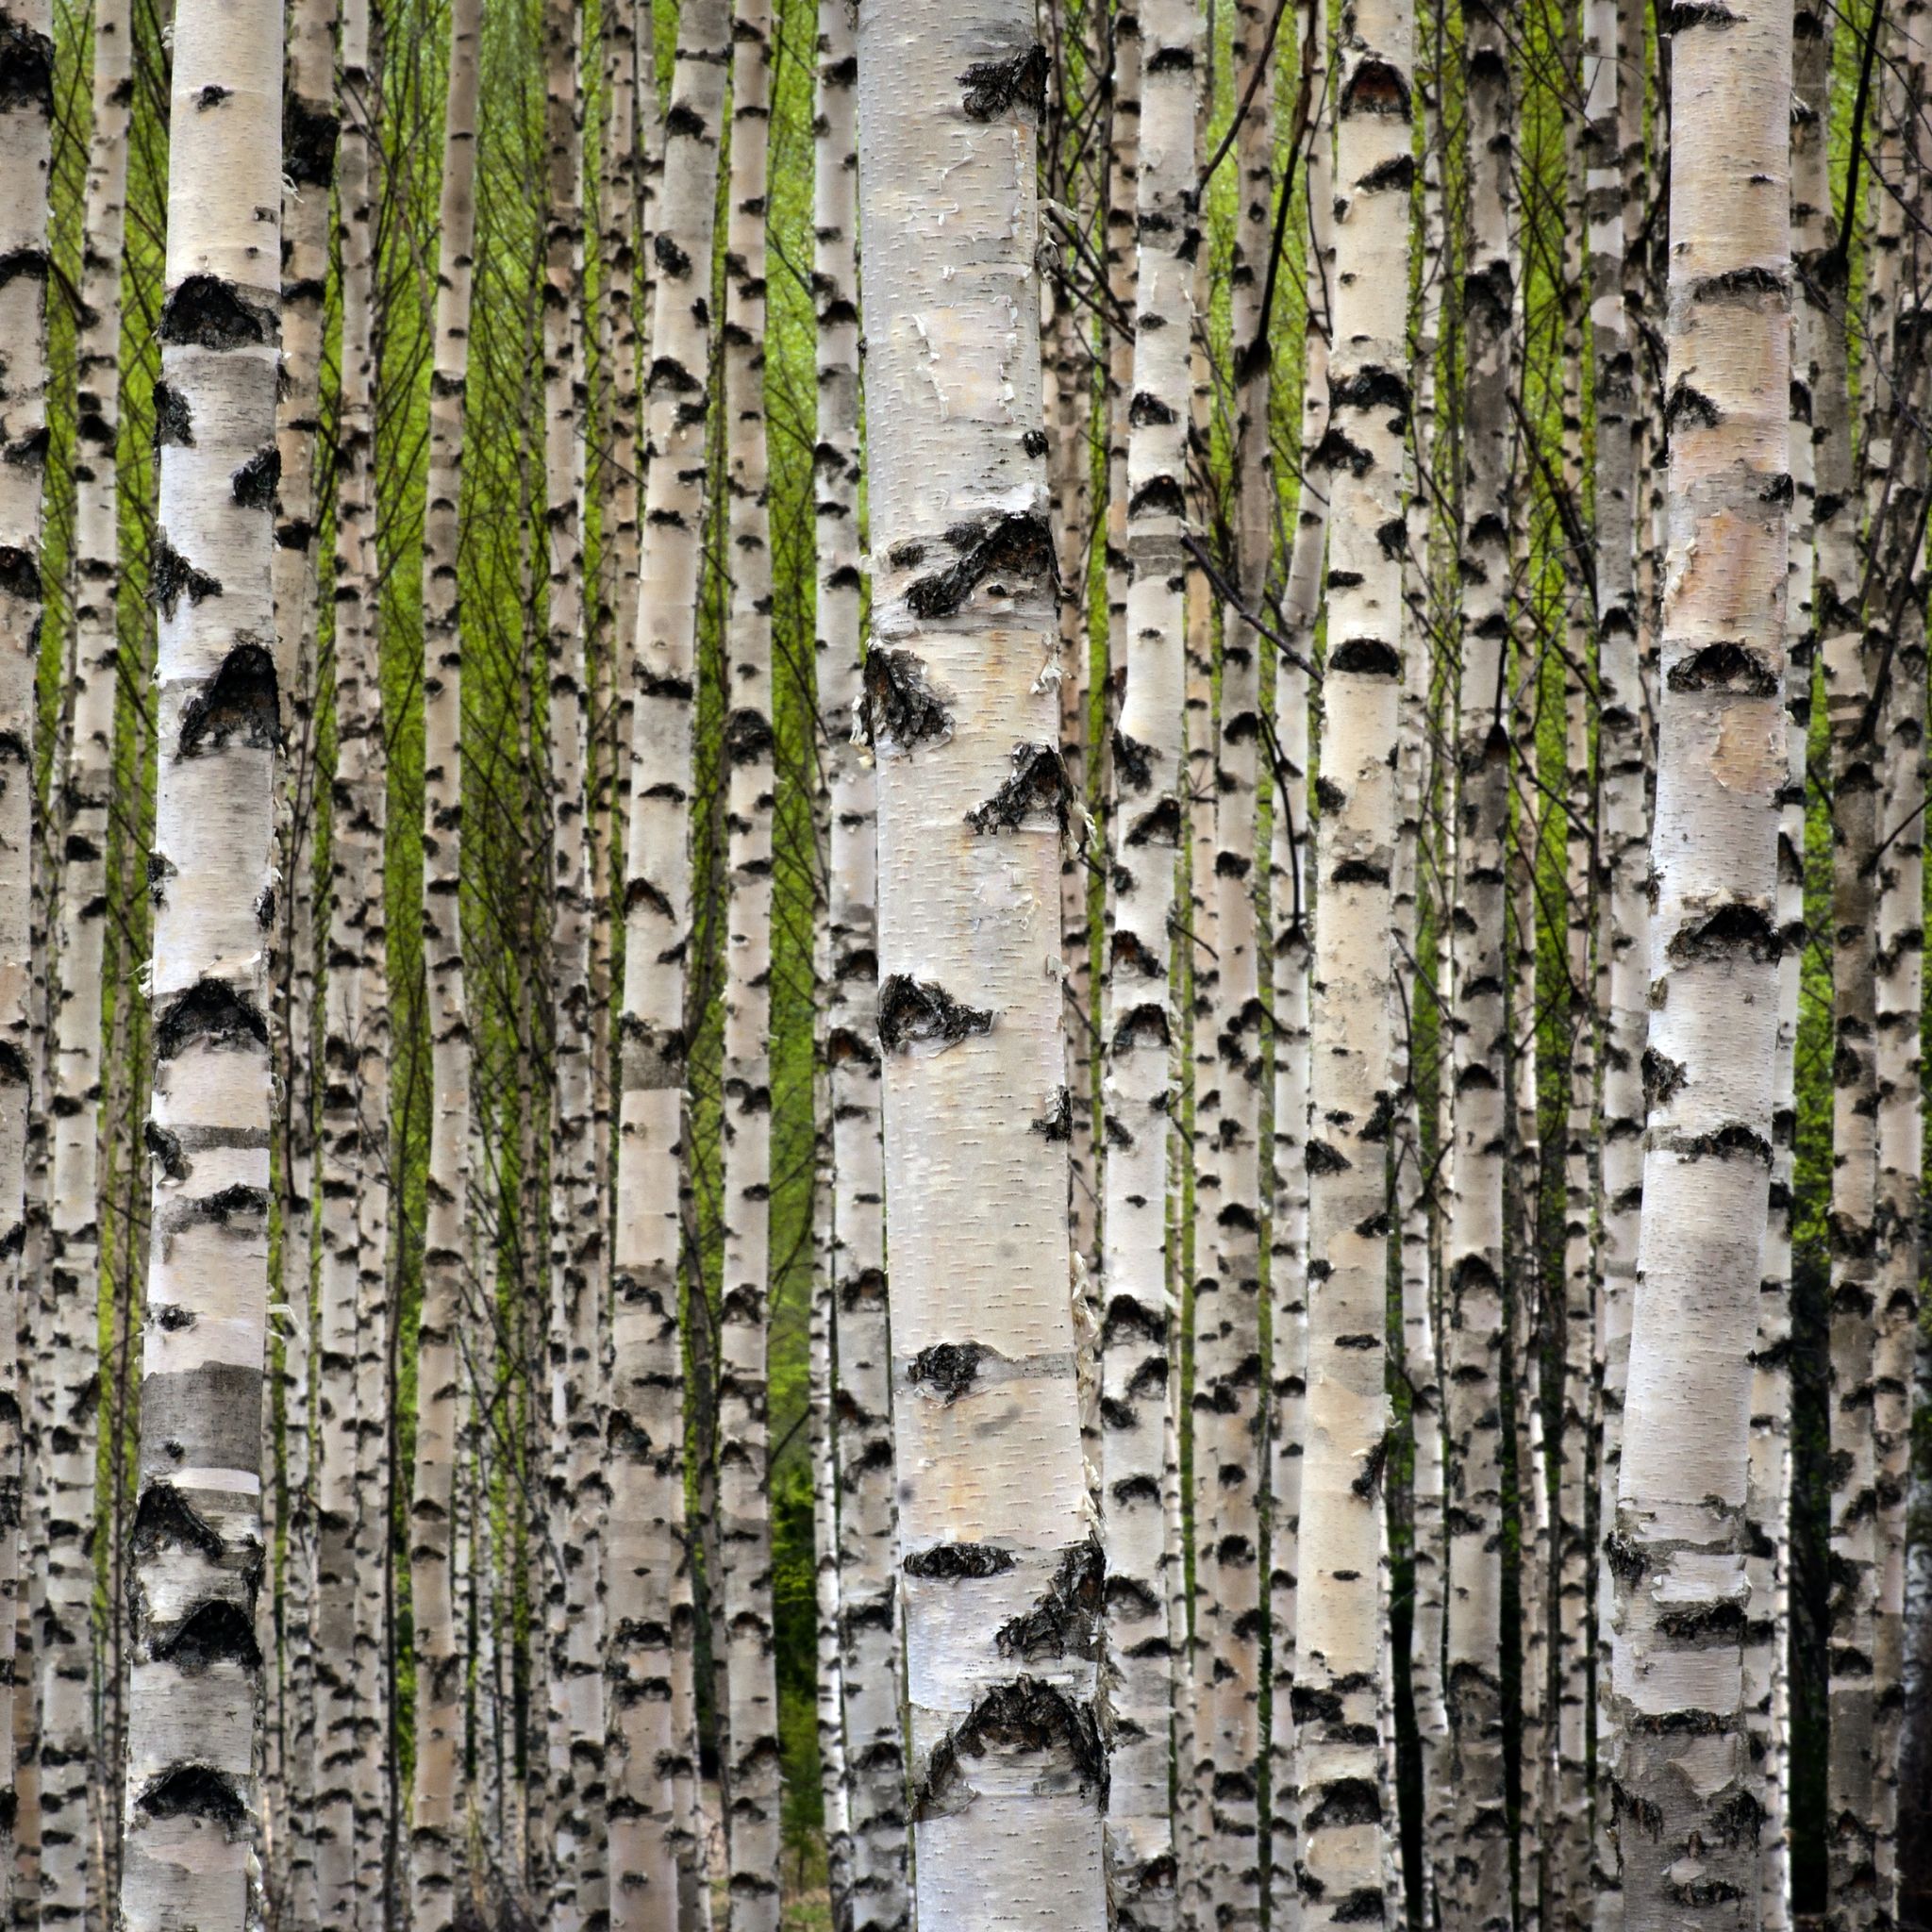 Sweet Birch Essential Oil Uses and Benefits